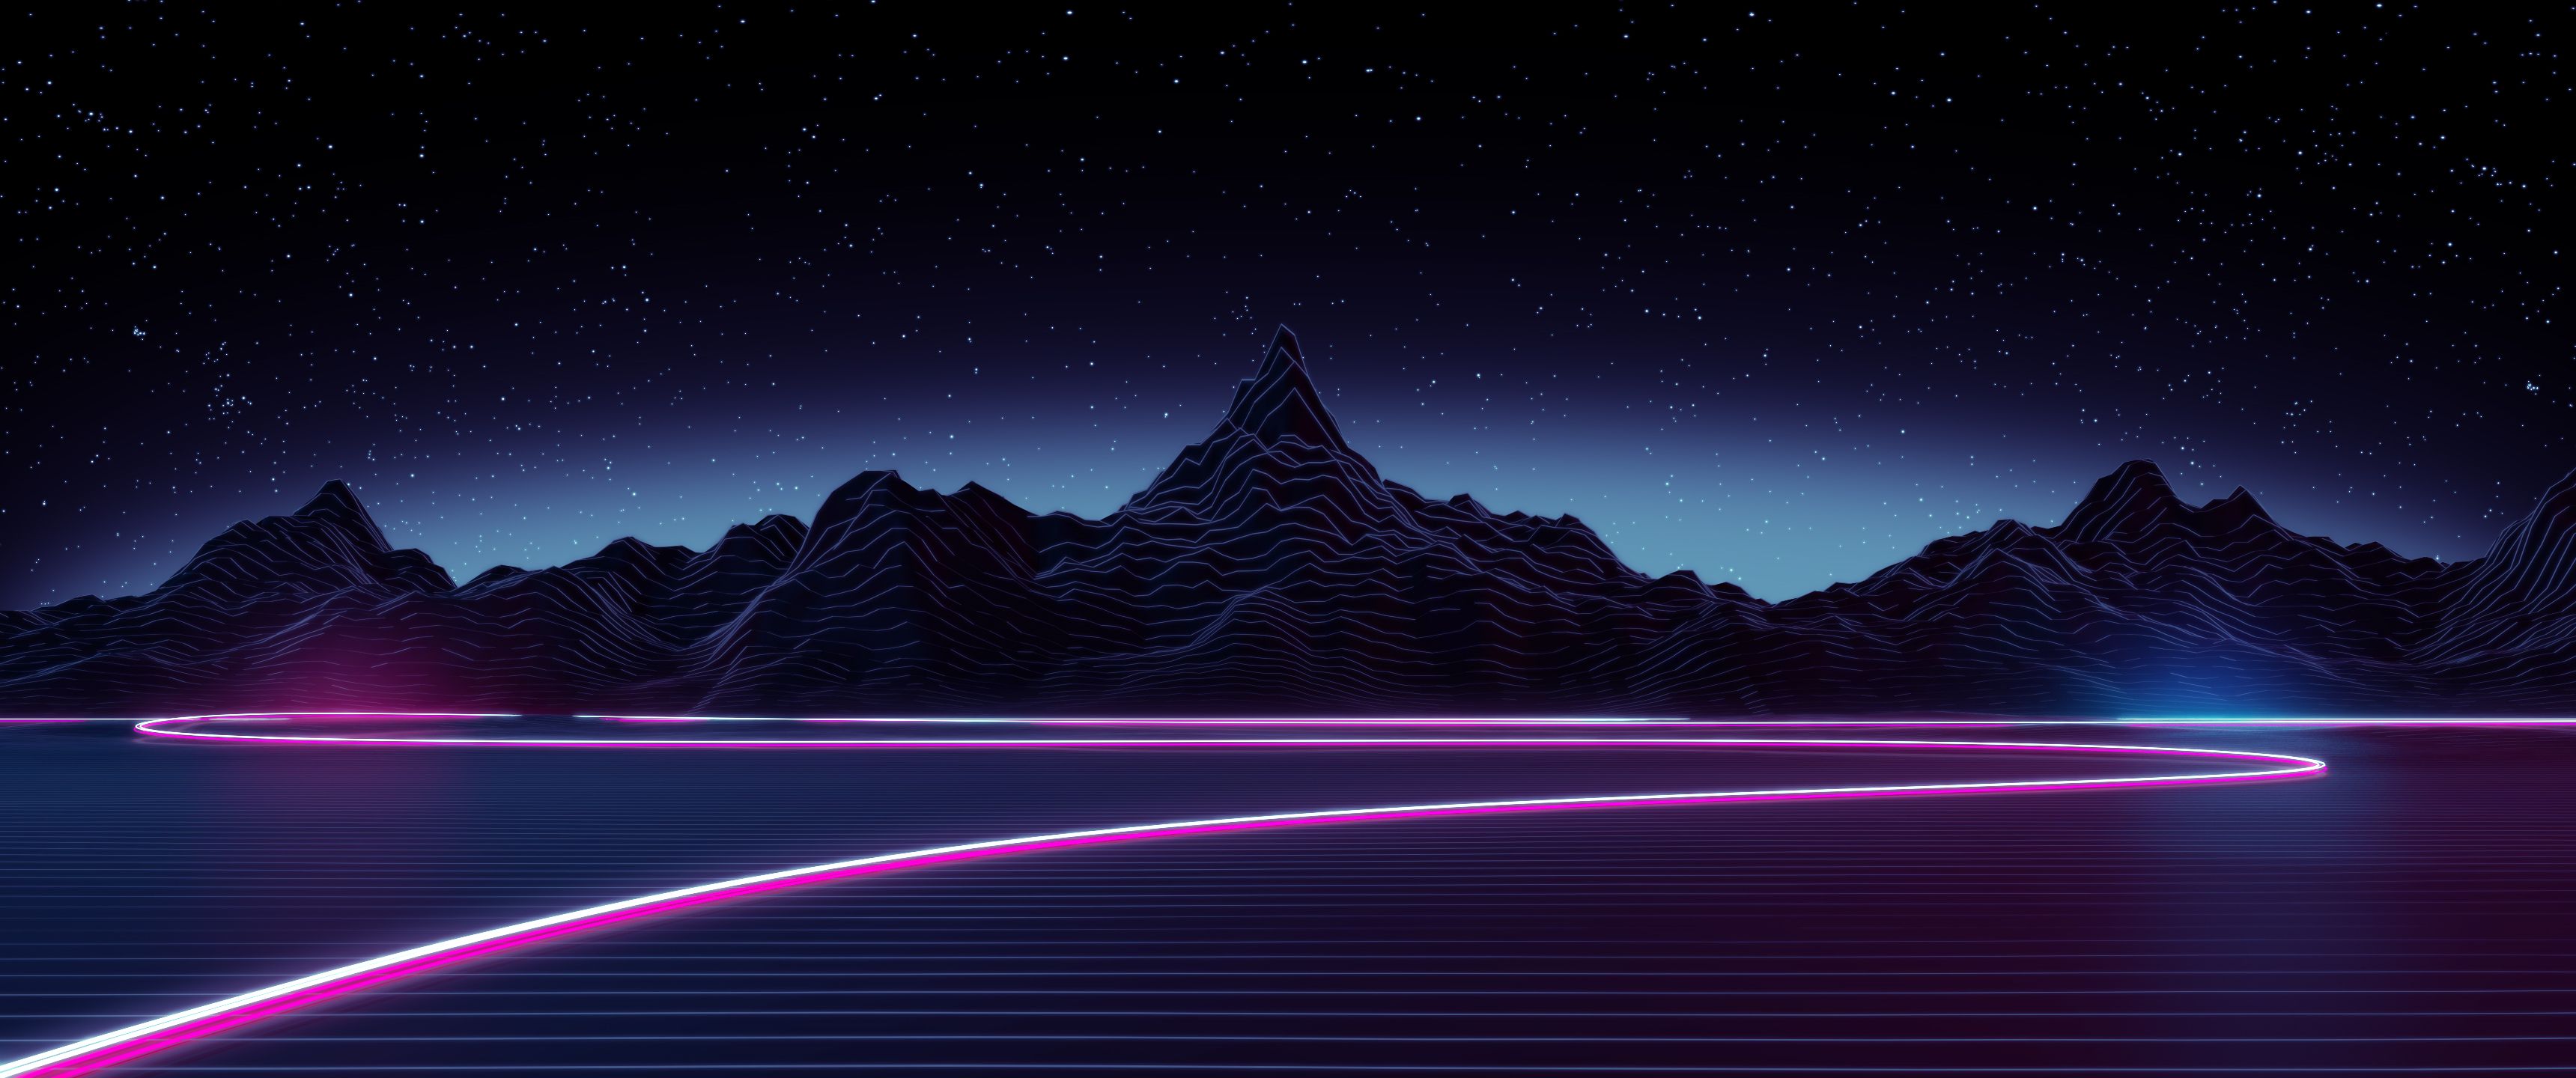 Imgur: The most awesome image on the Internet. Vaporwave wallpaper, 3440x1440 wallpaper, Neon wallpaper